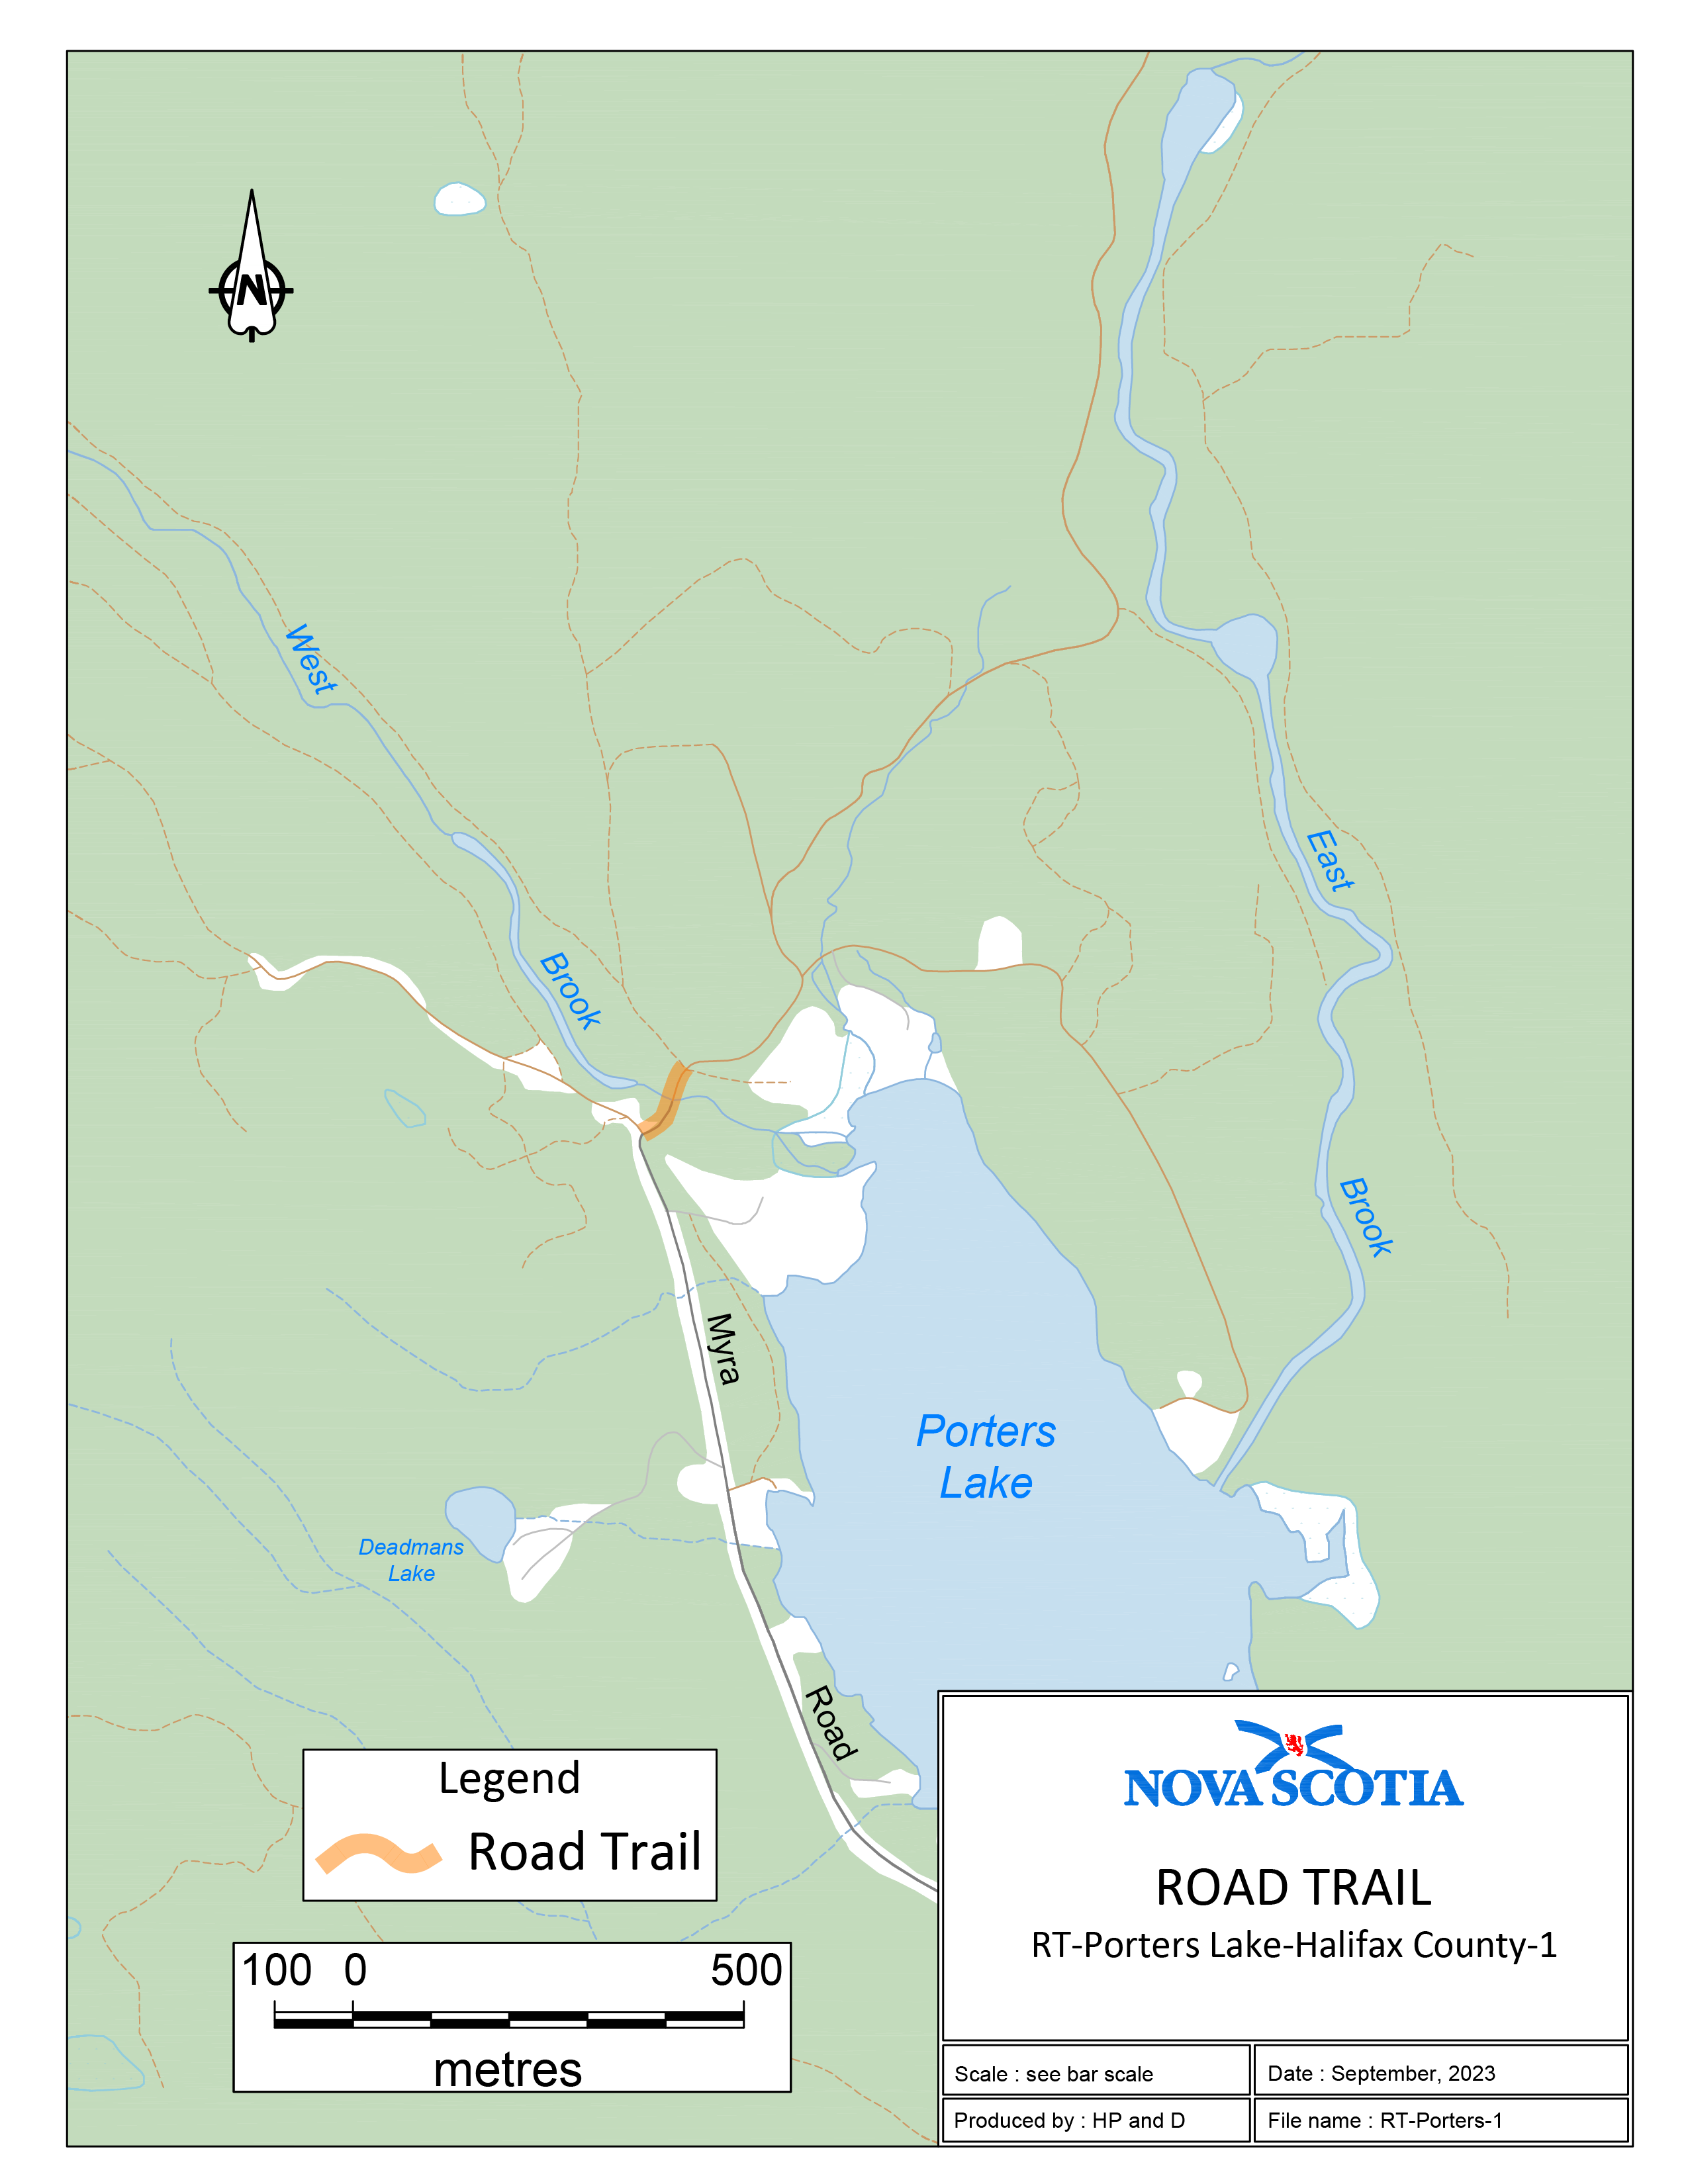 Graphic showing map of the Porters Lake Road Trail